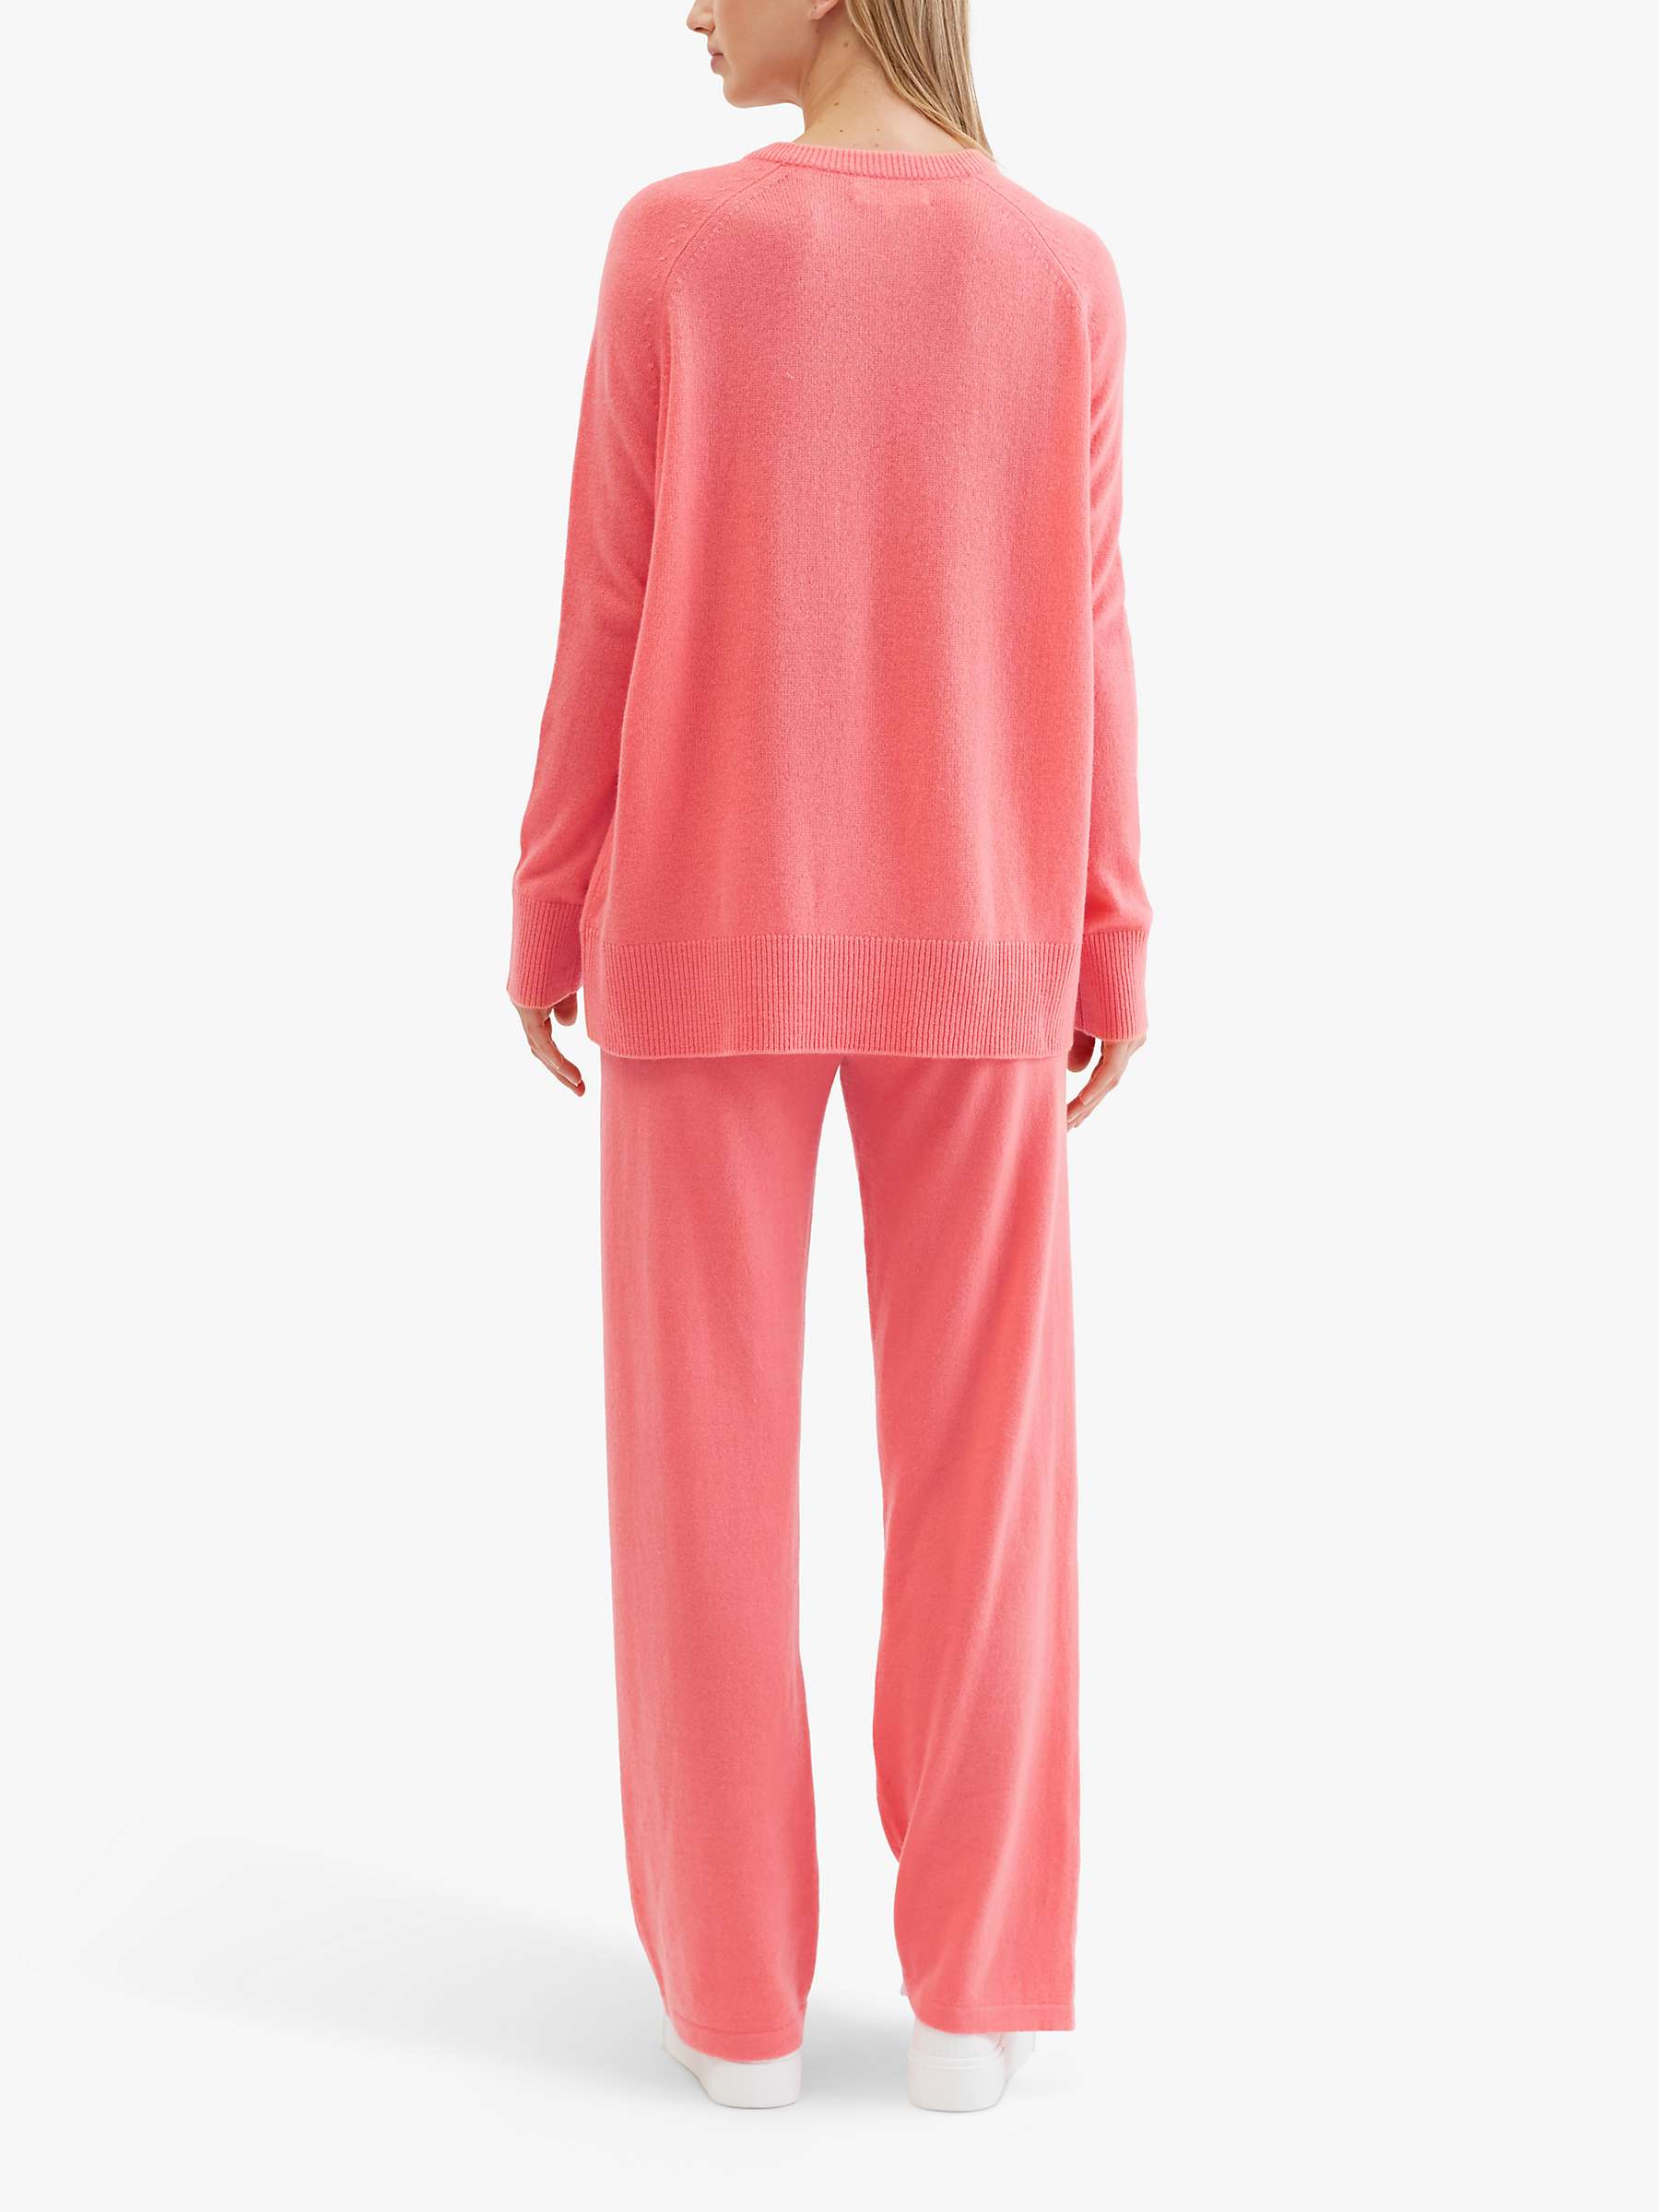 Buy Chinti & Parker Cashmere Slouchy Jumper Online at johnlewis.com